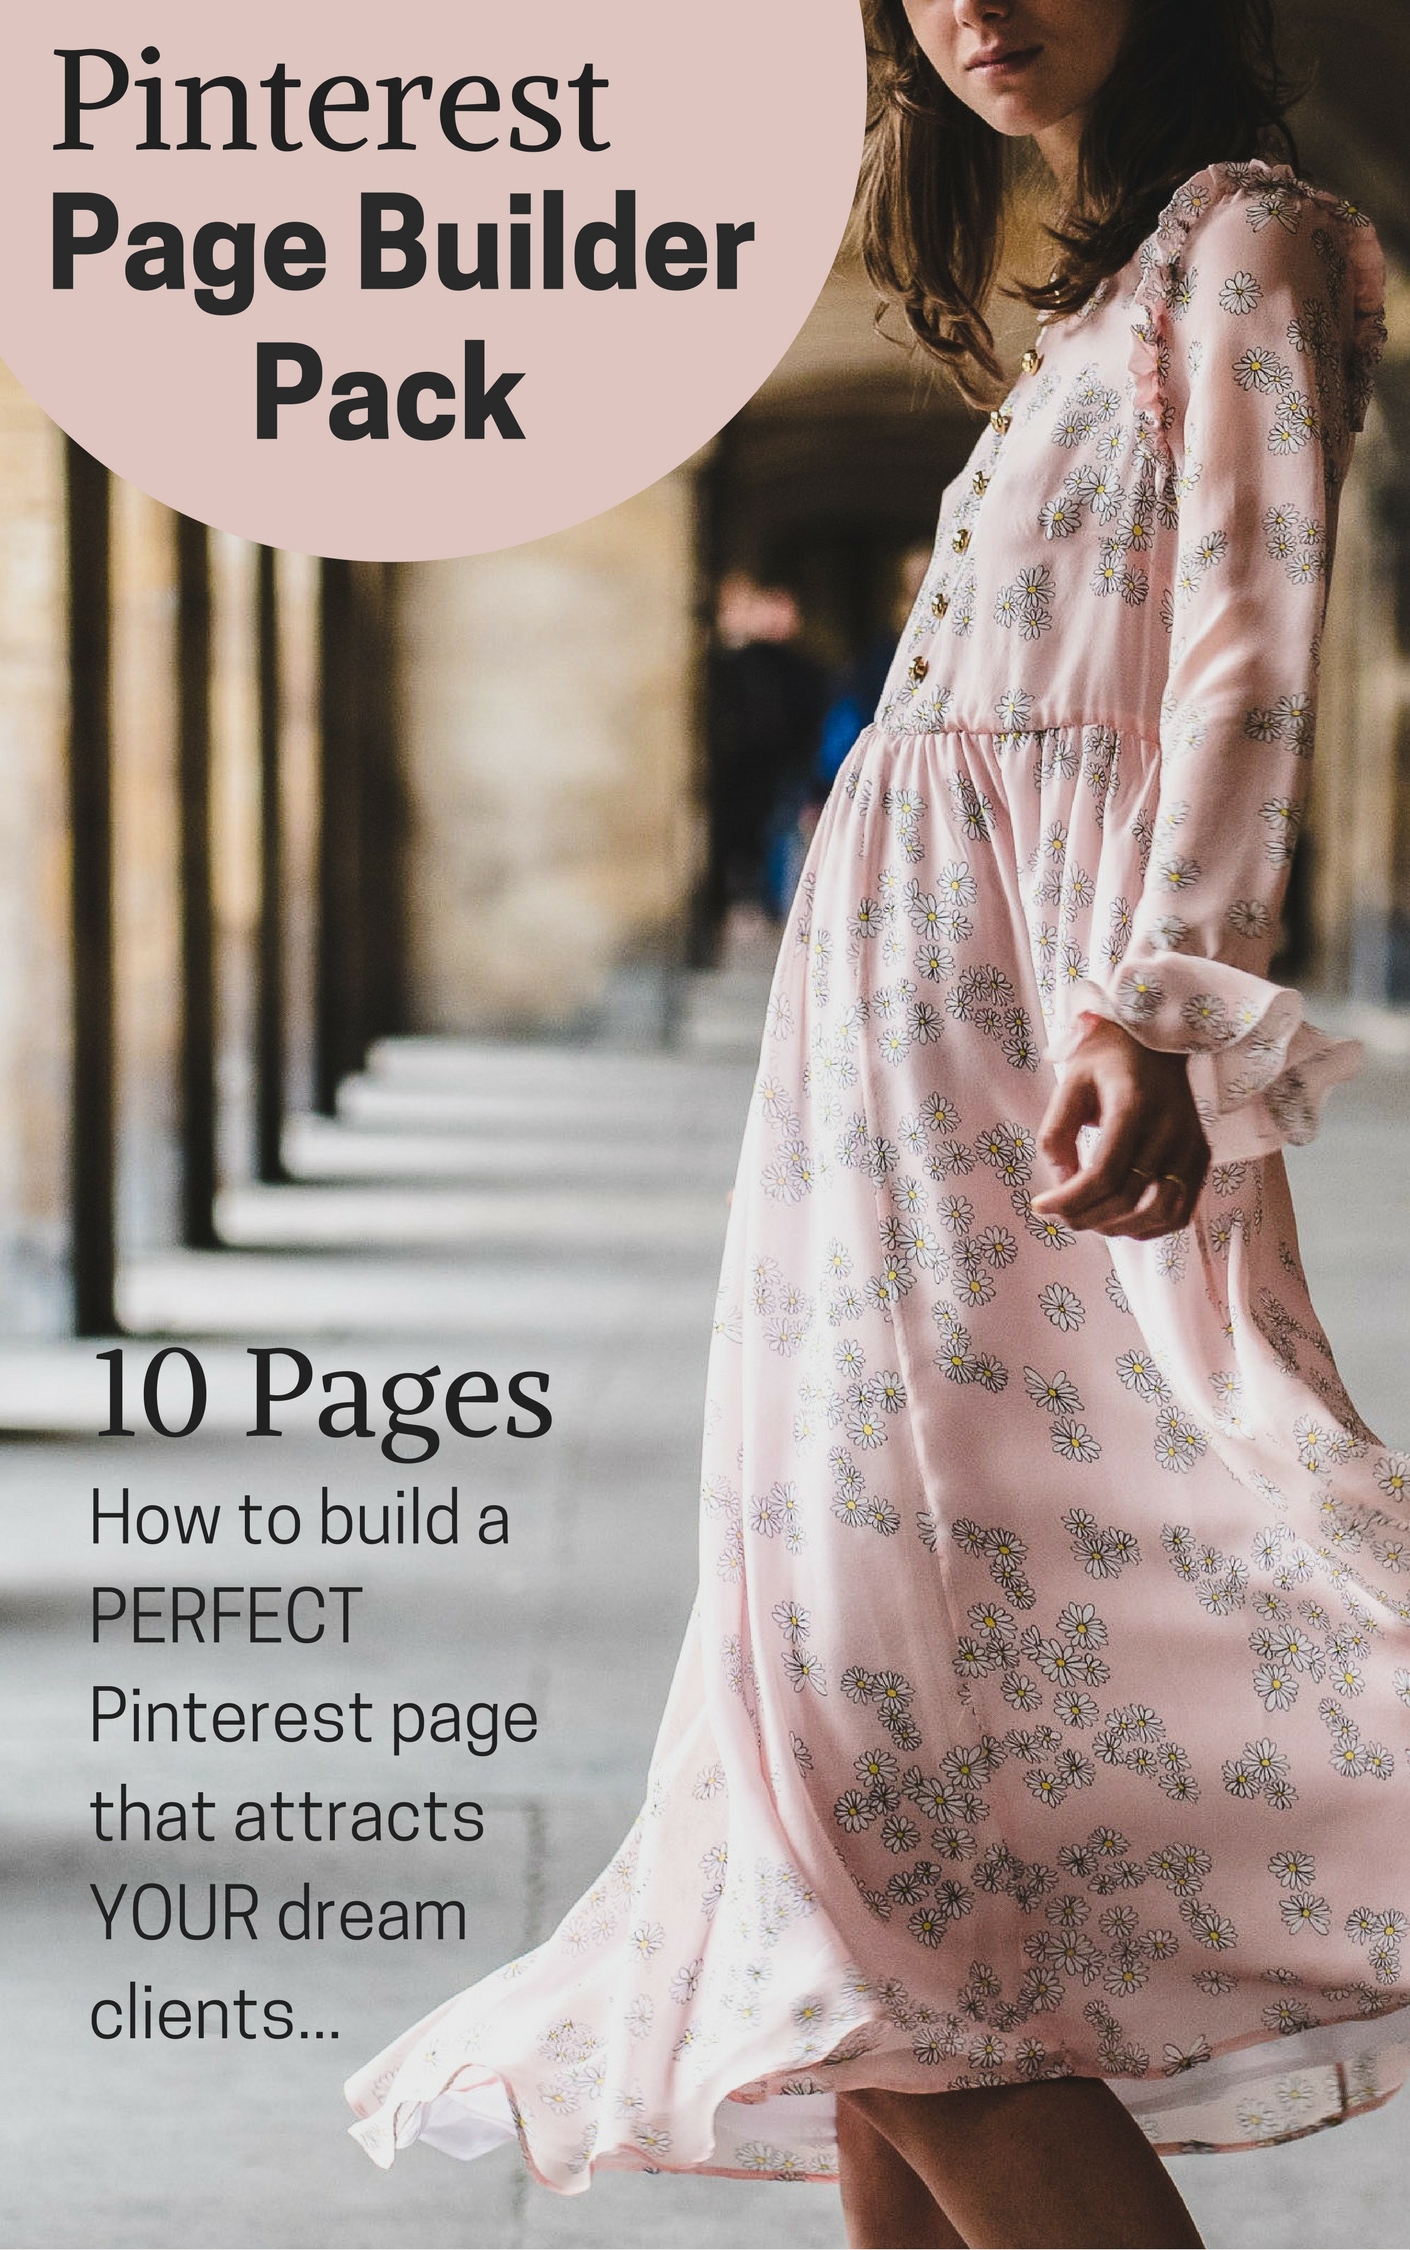 Pinterest for Business Page Builder Pack! A 10-page guide to help you build a Pinterest page that will attract your perfect clients and get more traffic to your website | BornToBeSocial.com - Pinterest Marketing & Consulting